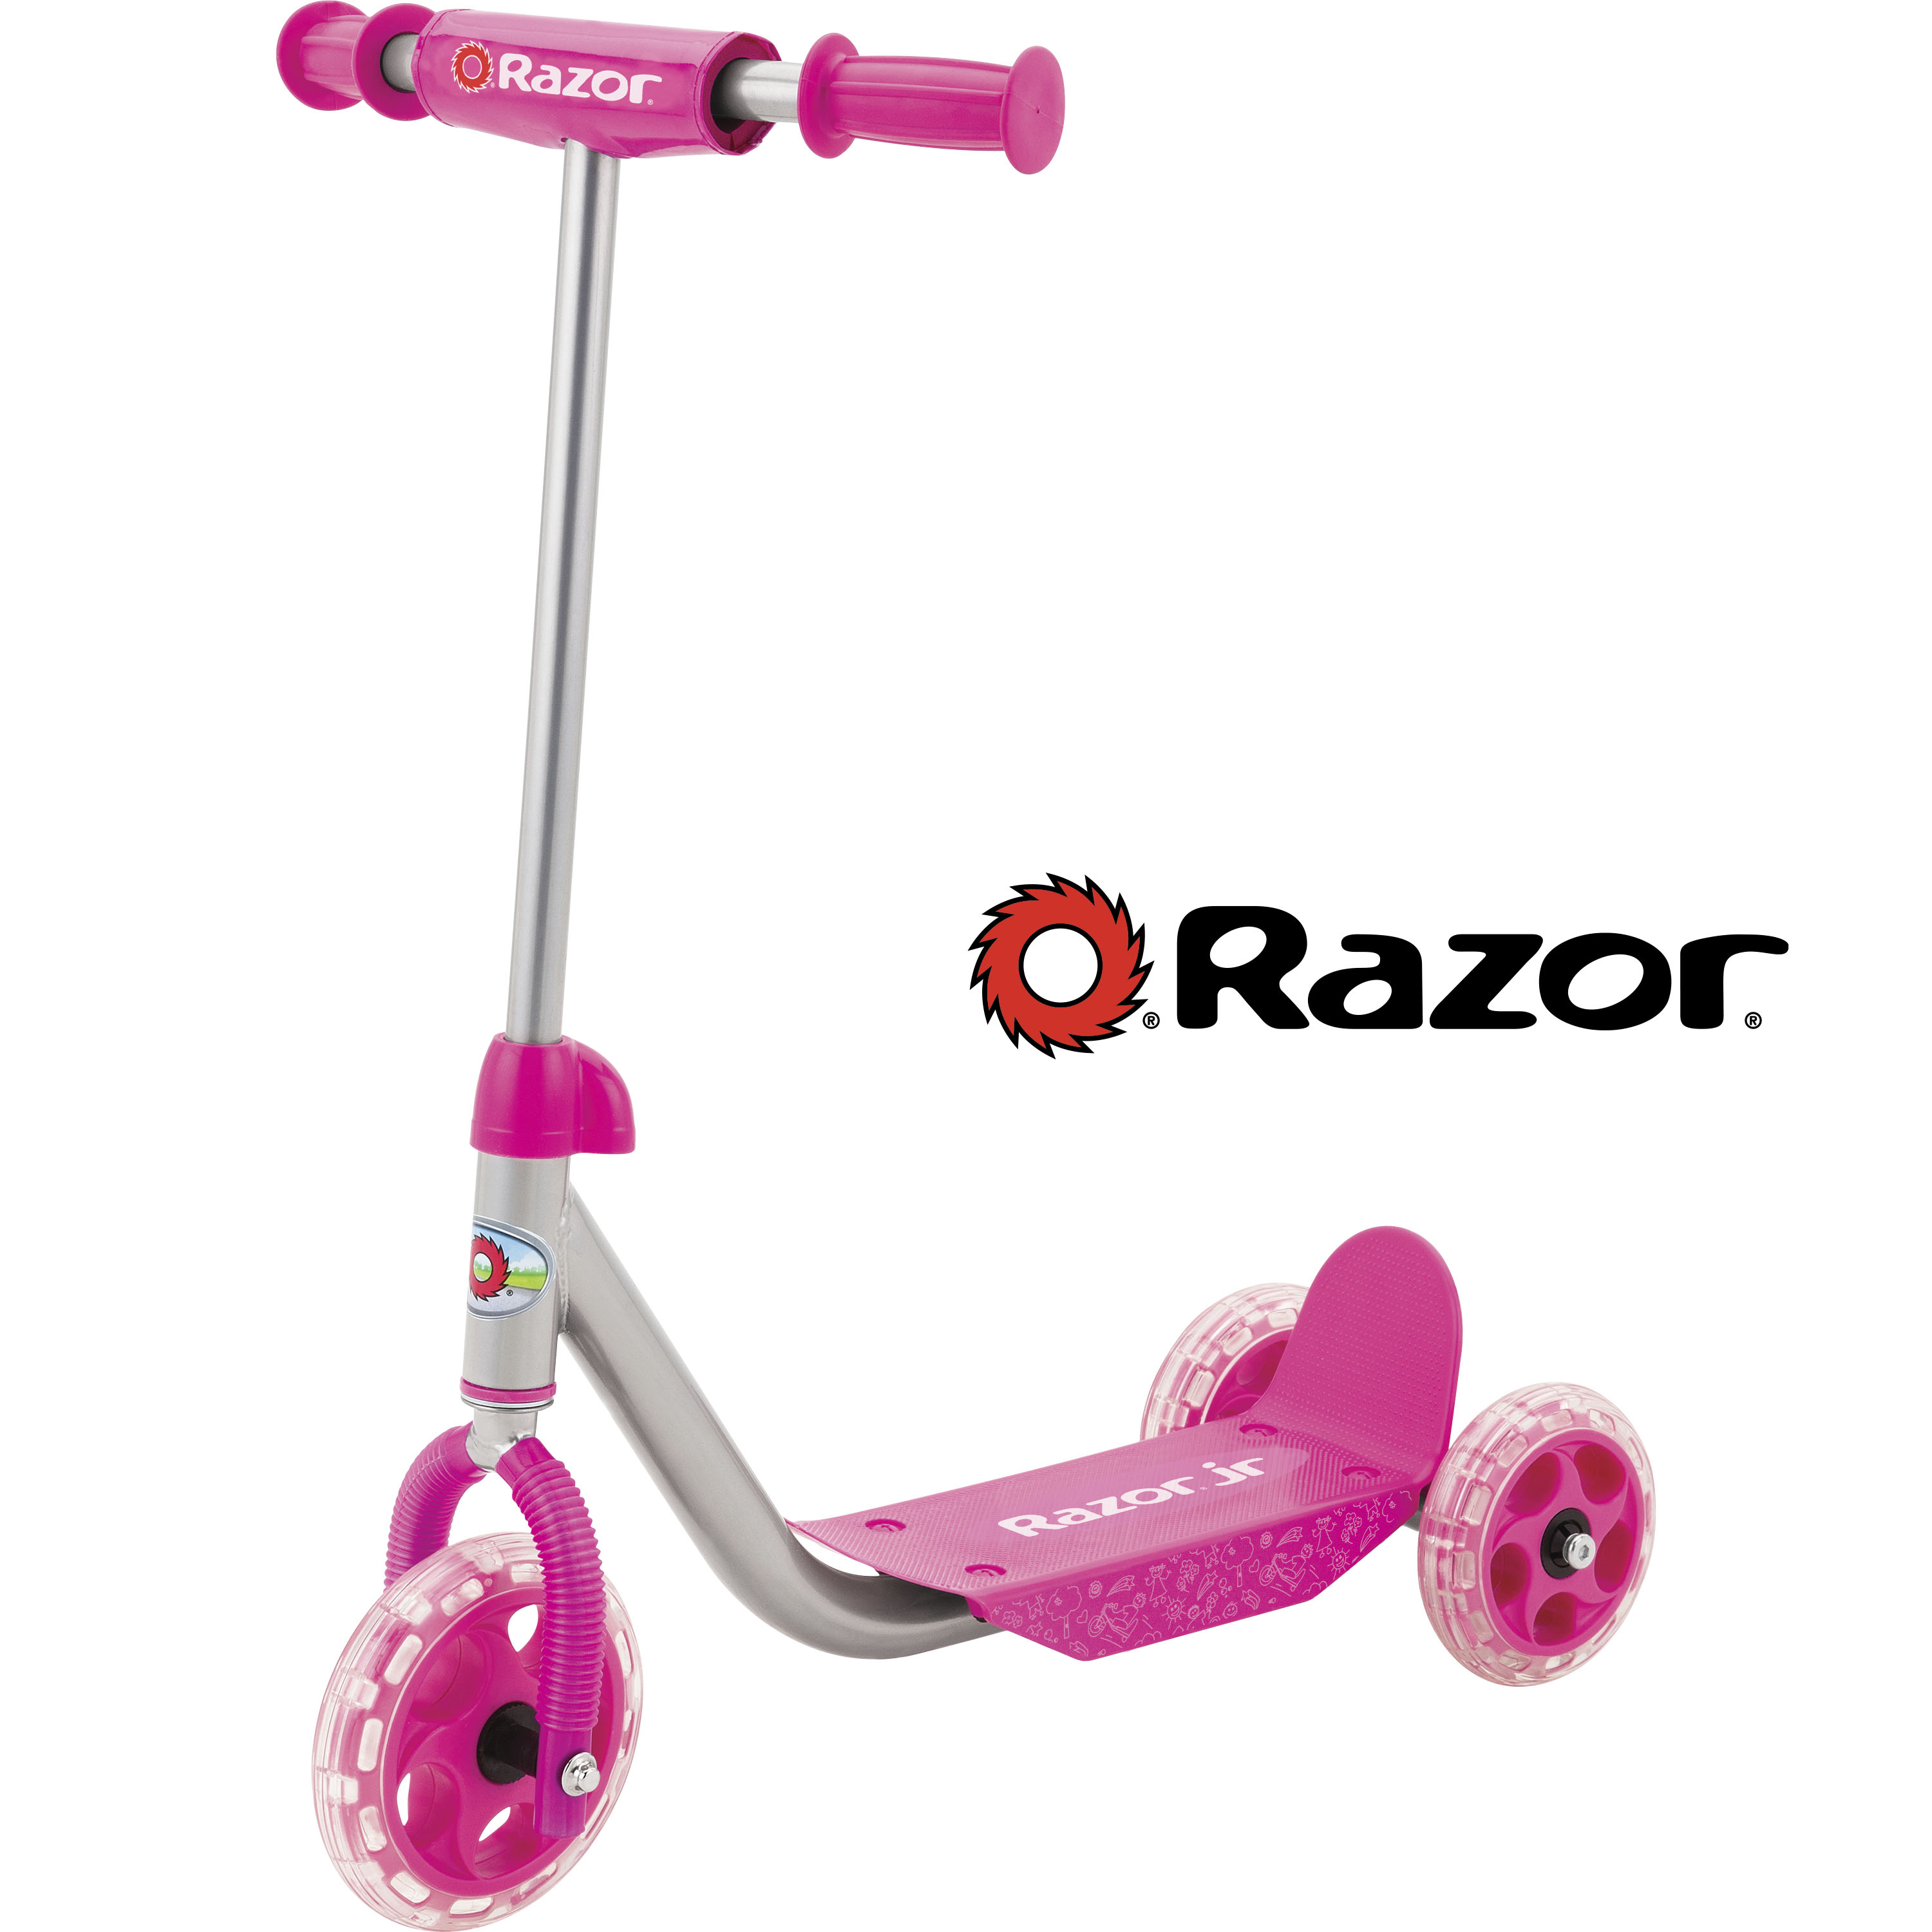 Razor Jr 3-Wheel Lil' Kick Scooter - For Ages 3 and up, Pink - image 1 of 8